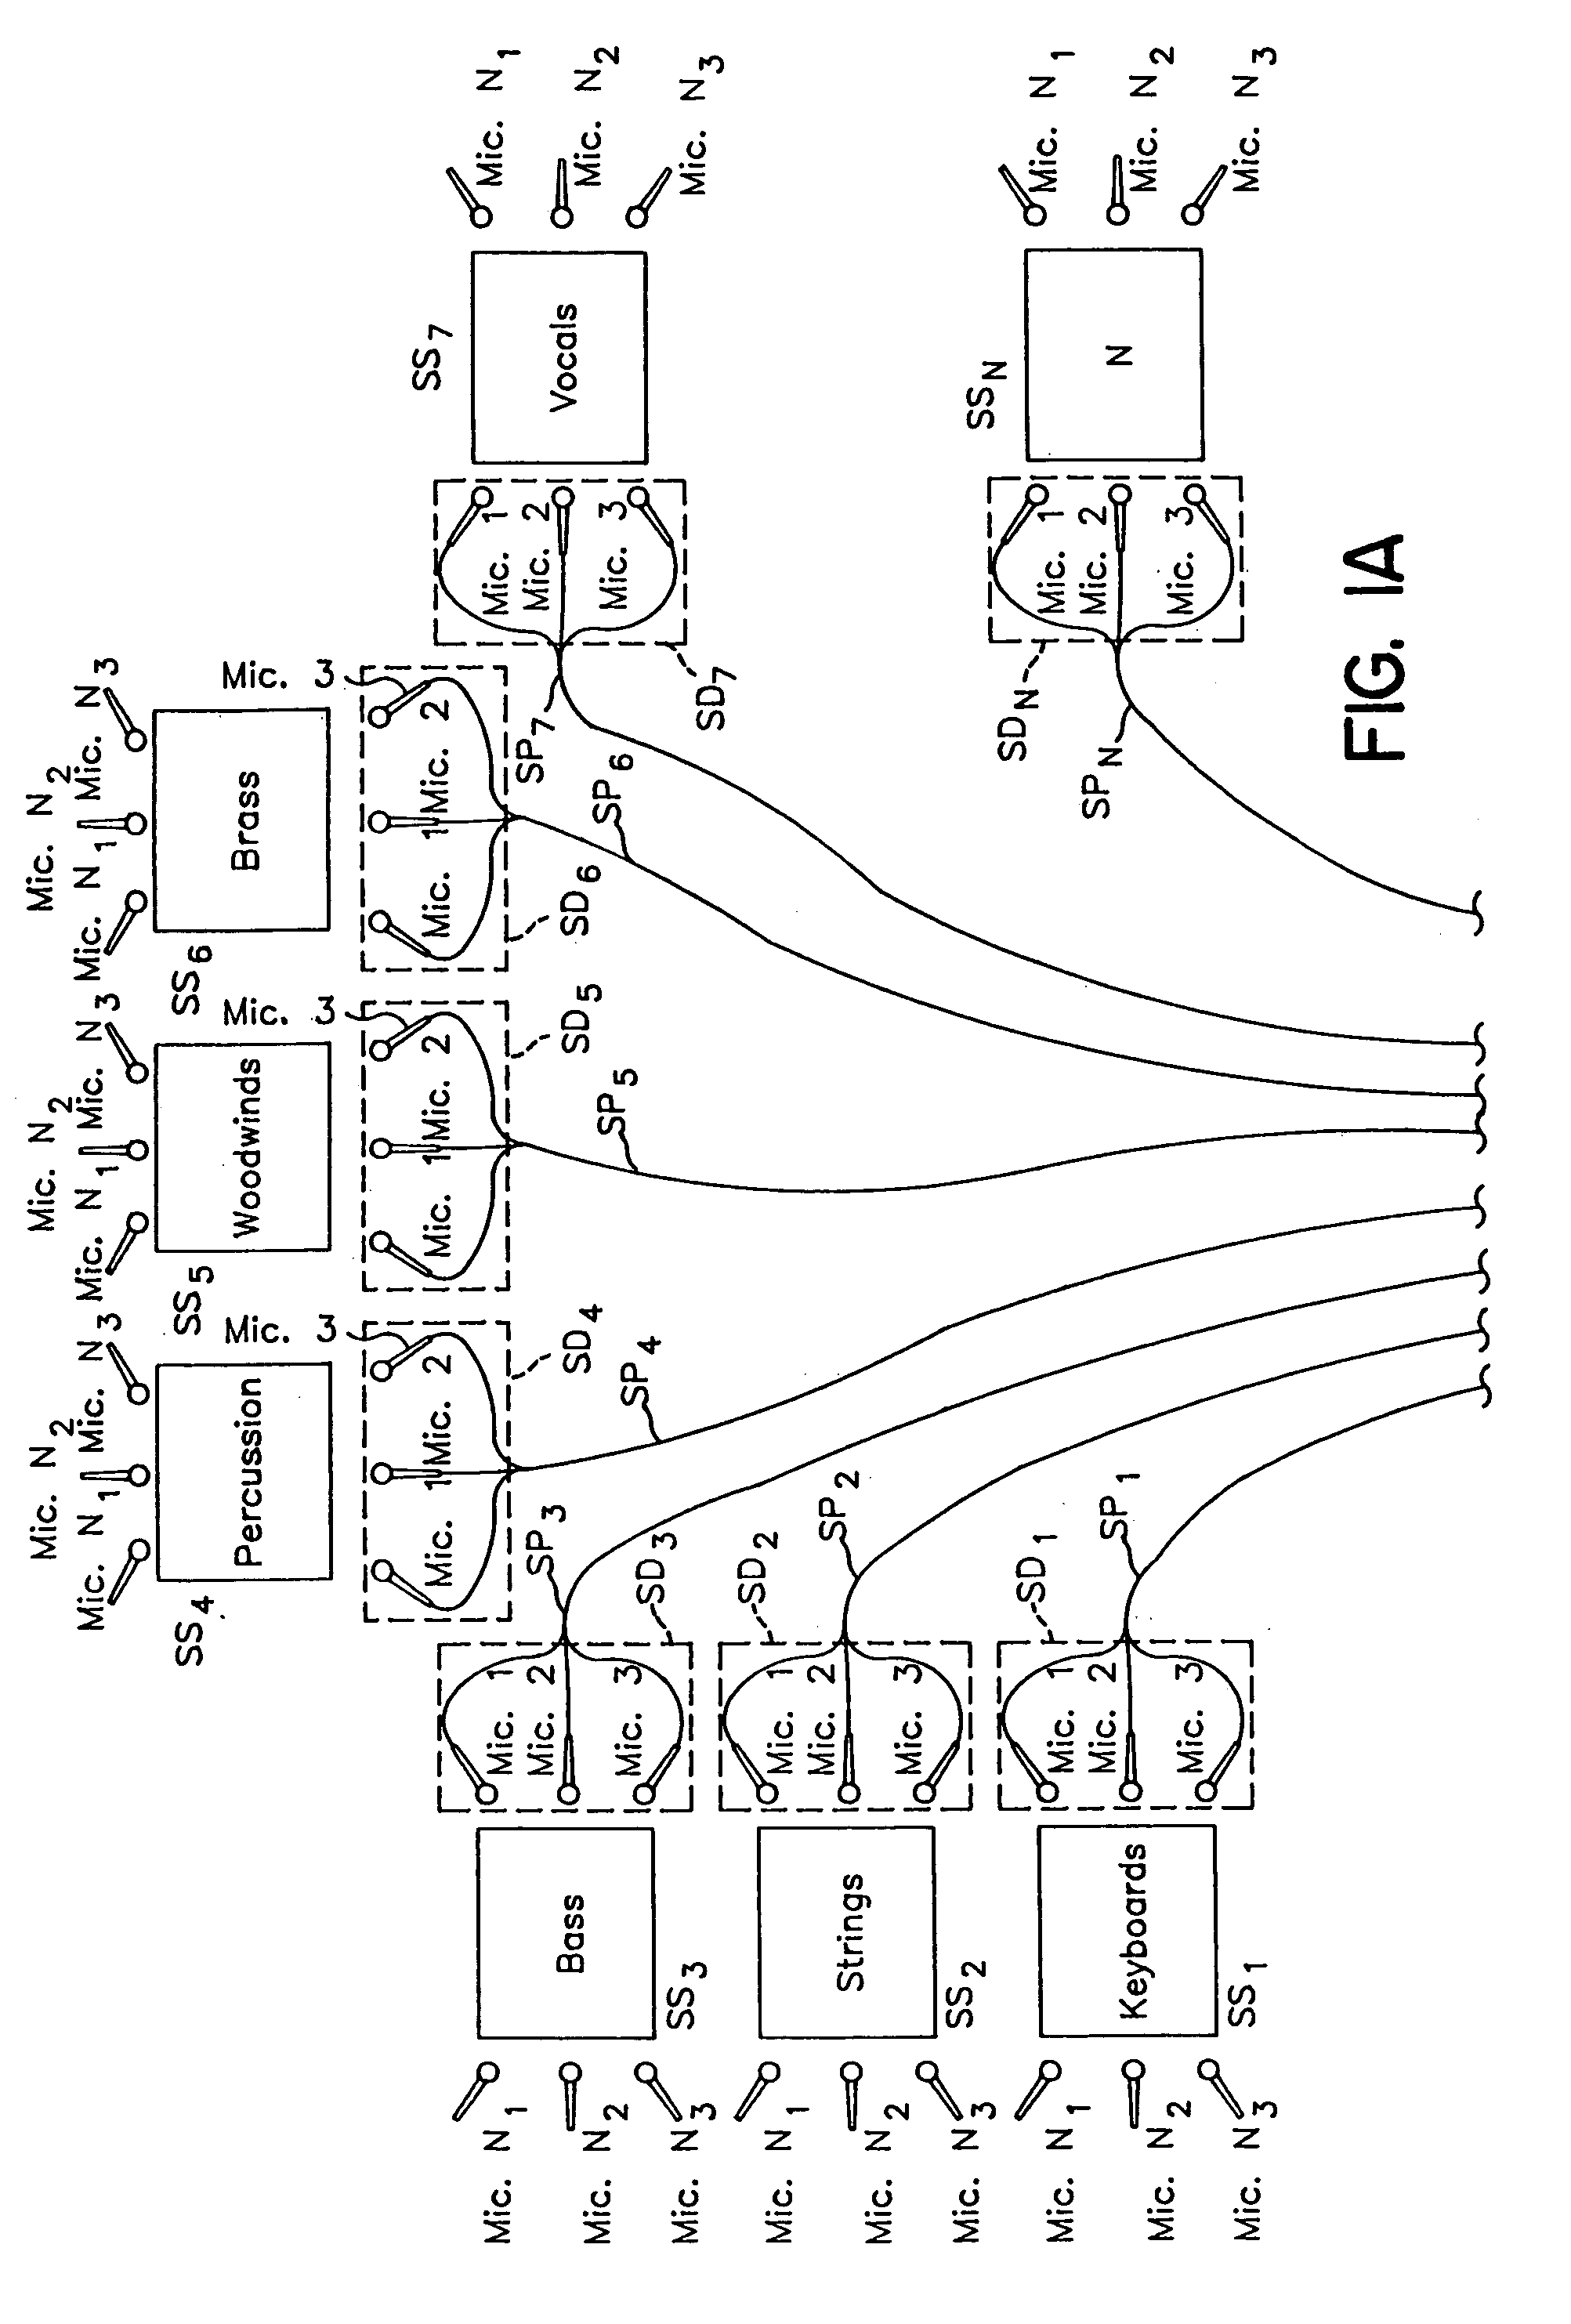 Sound system and method for capturing and reproducing sounds originating from a plurality of sound sources